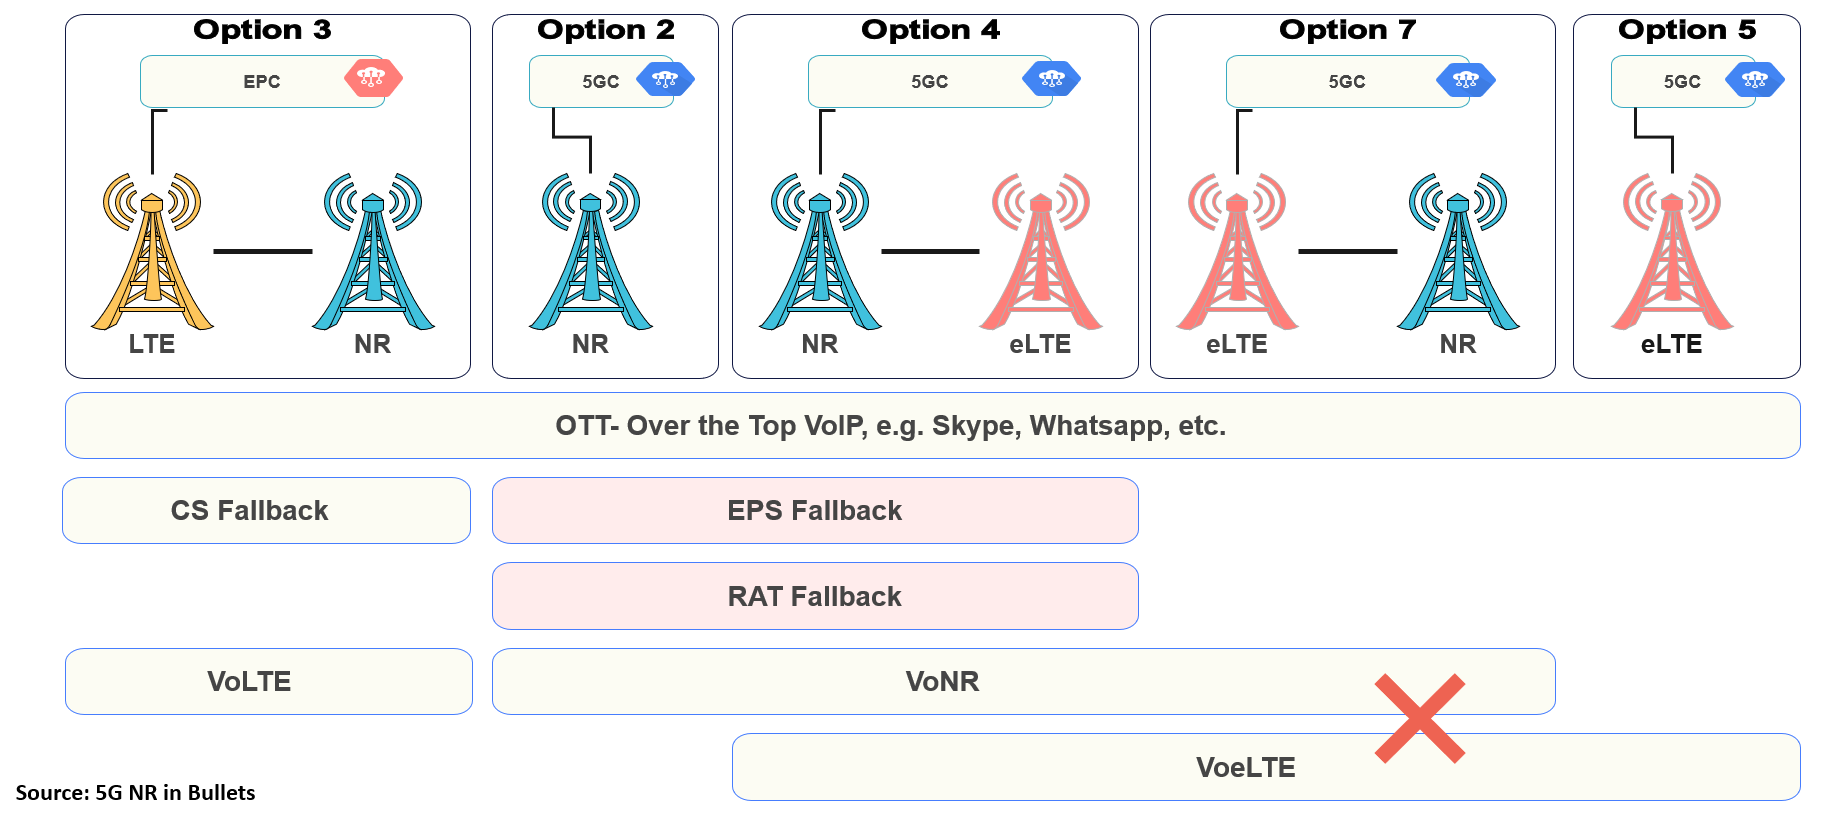 Dive into EPS Fallback(5G SA Voice Solution) - (Article + Video)